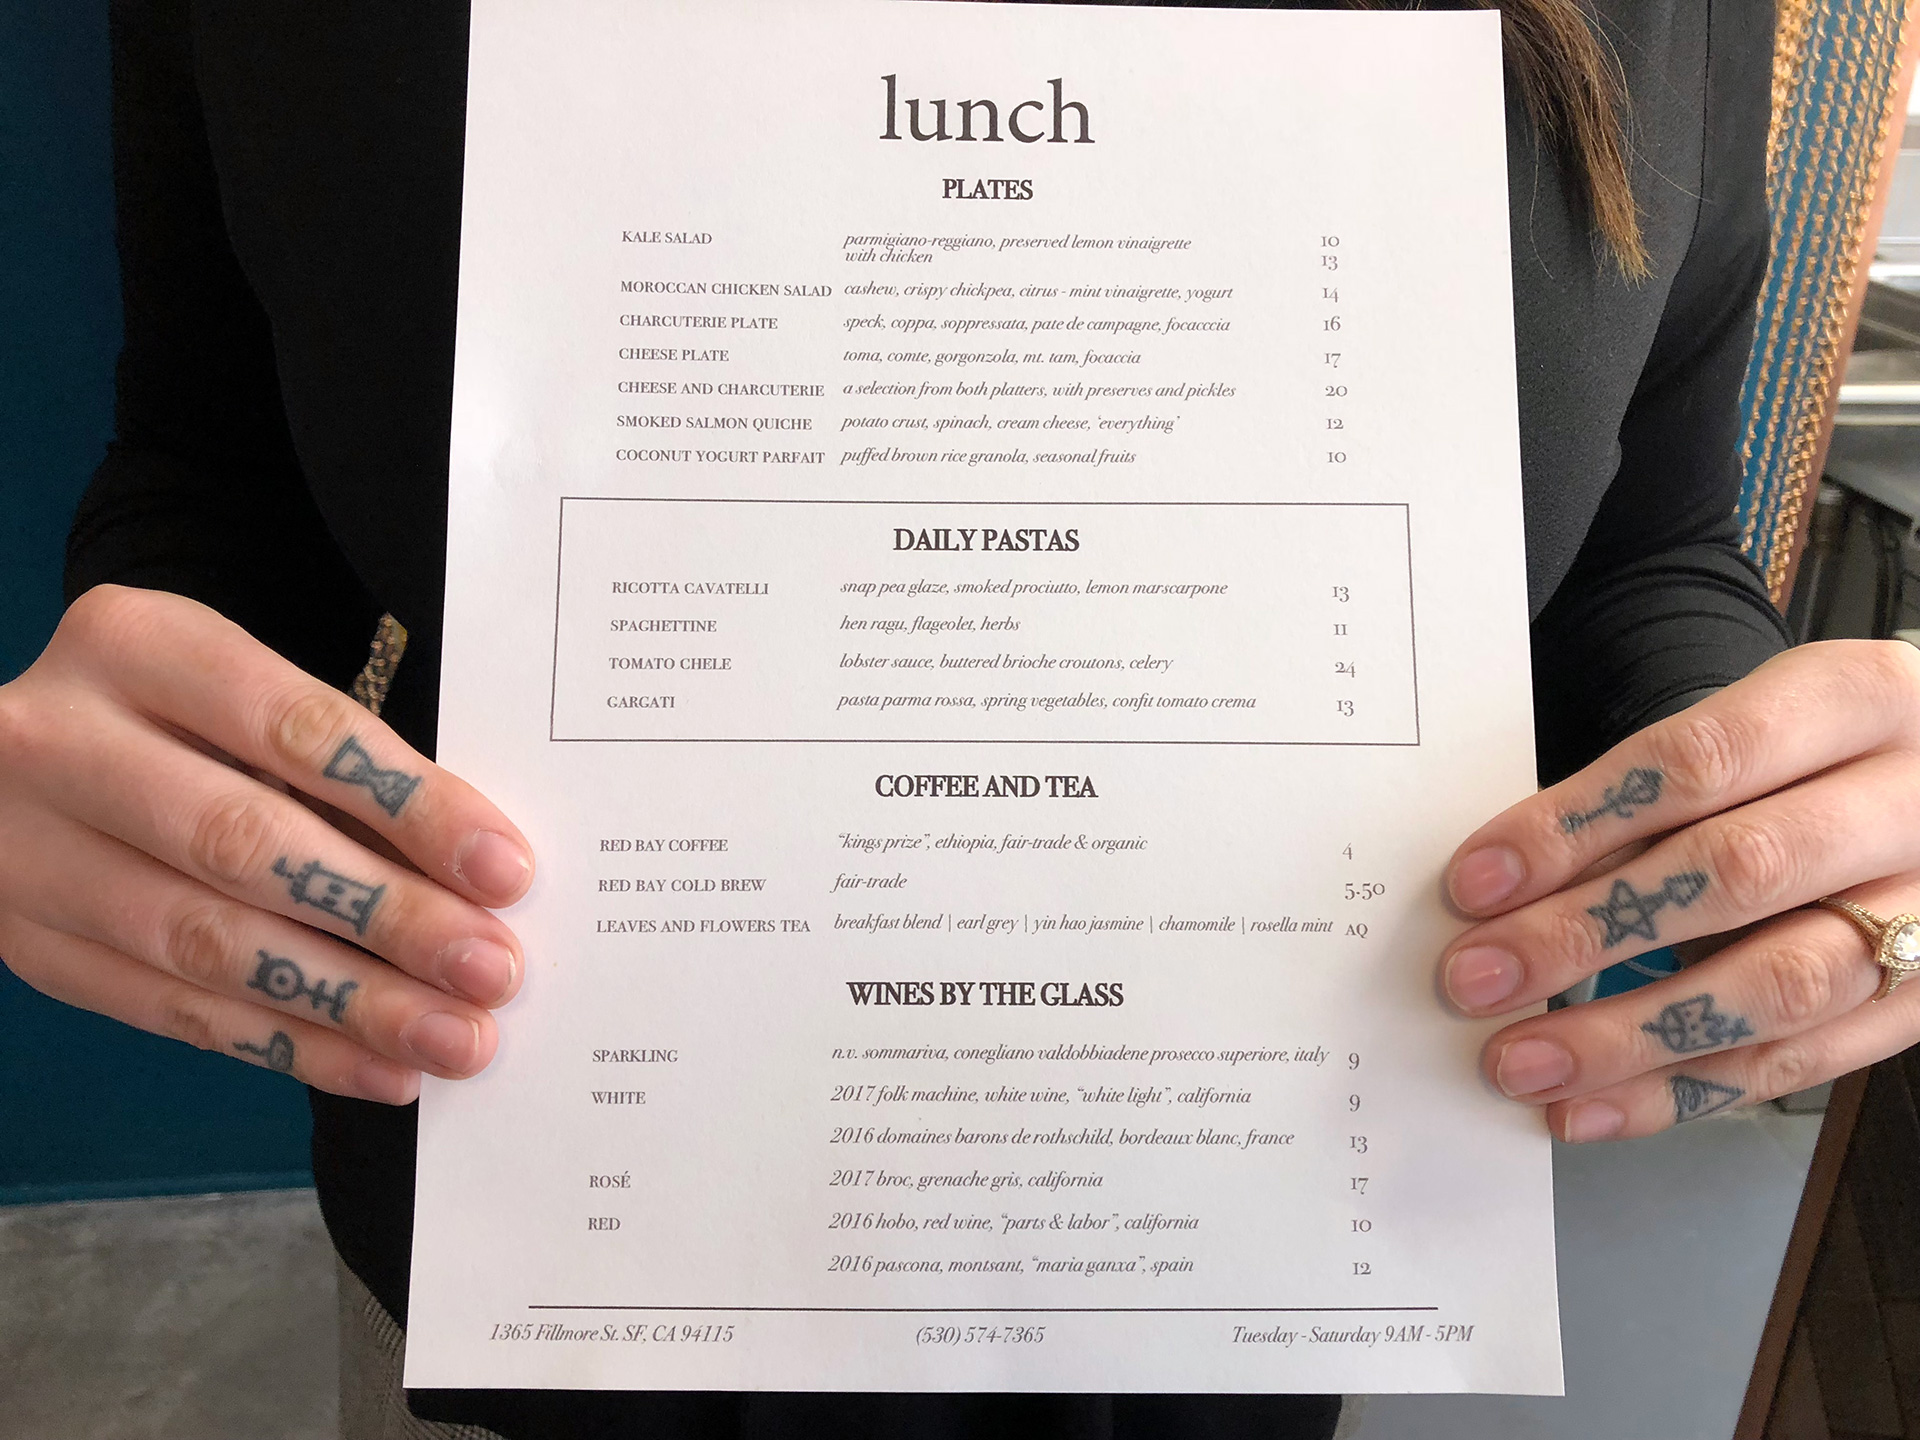 Madison Michael's hands showcase the lunch menu at Merchant Roots